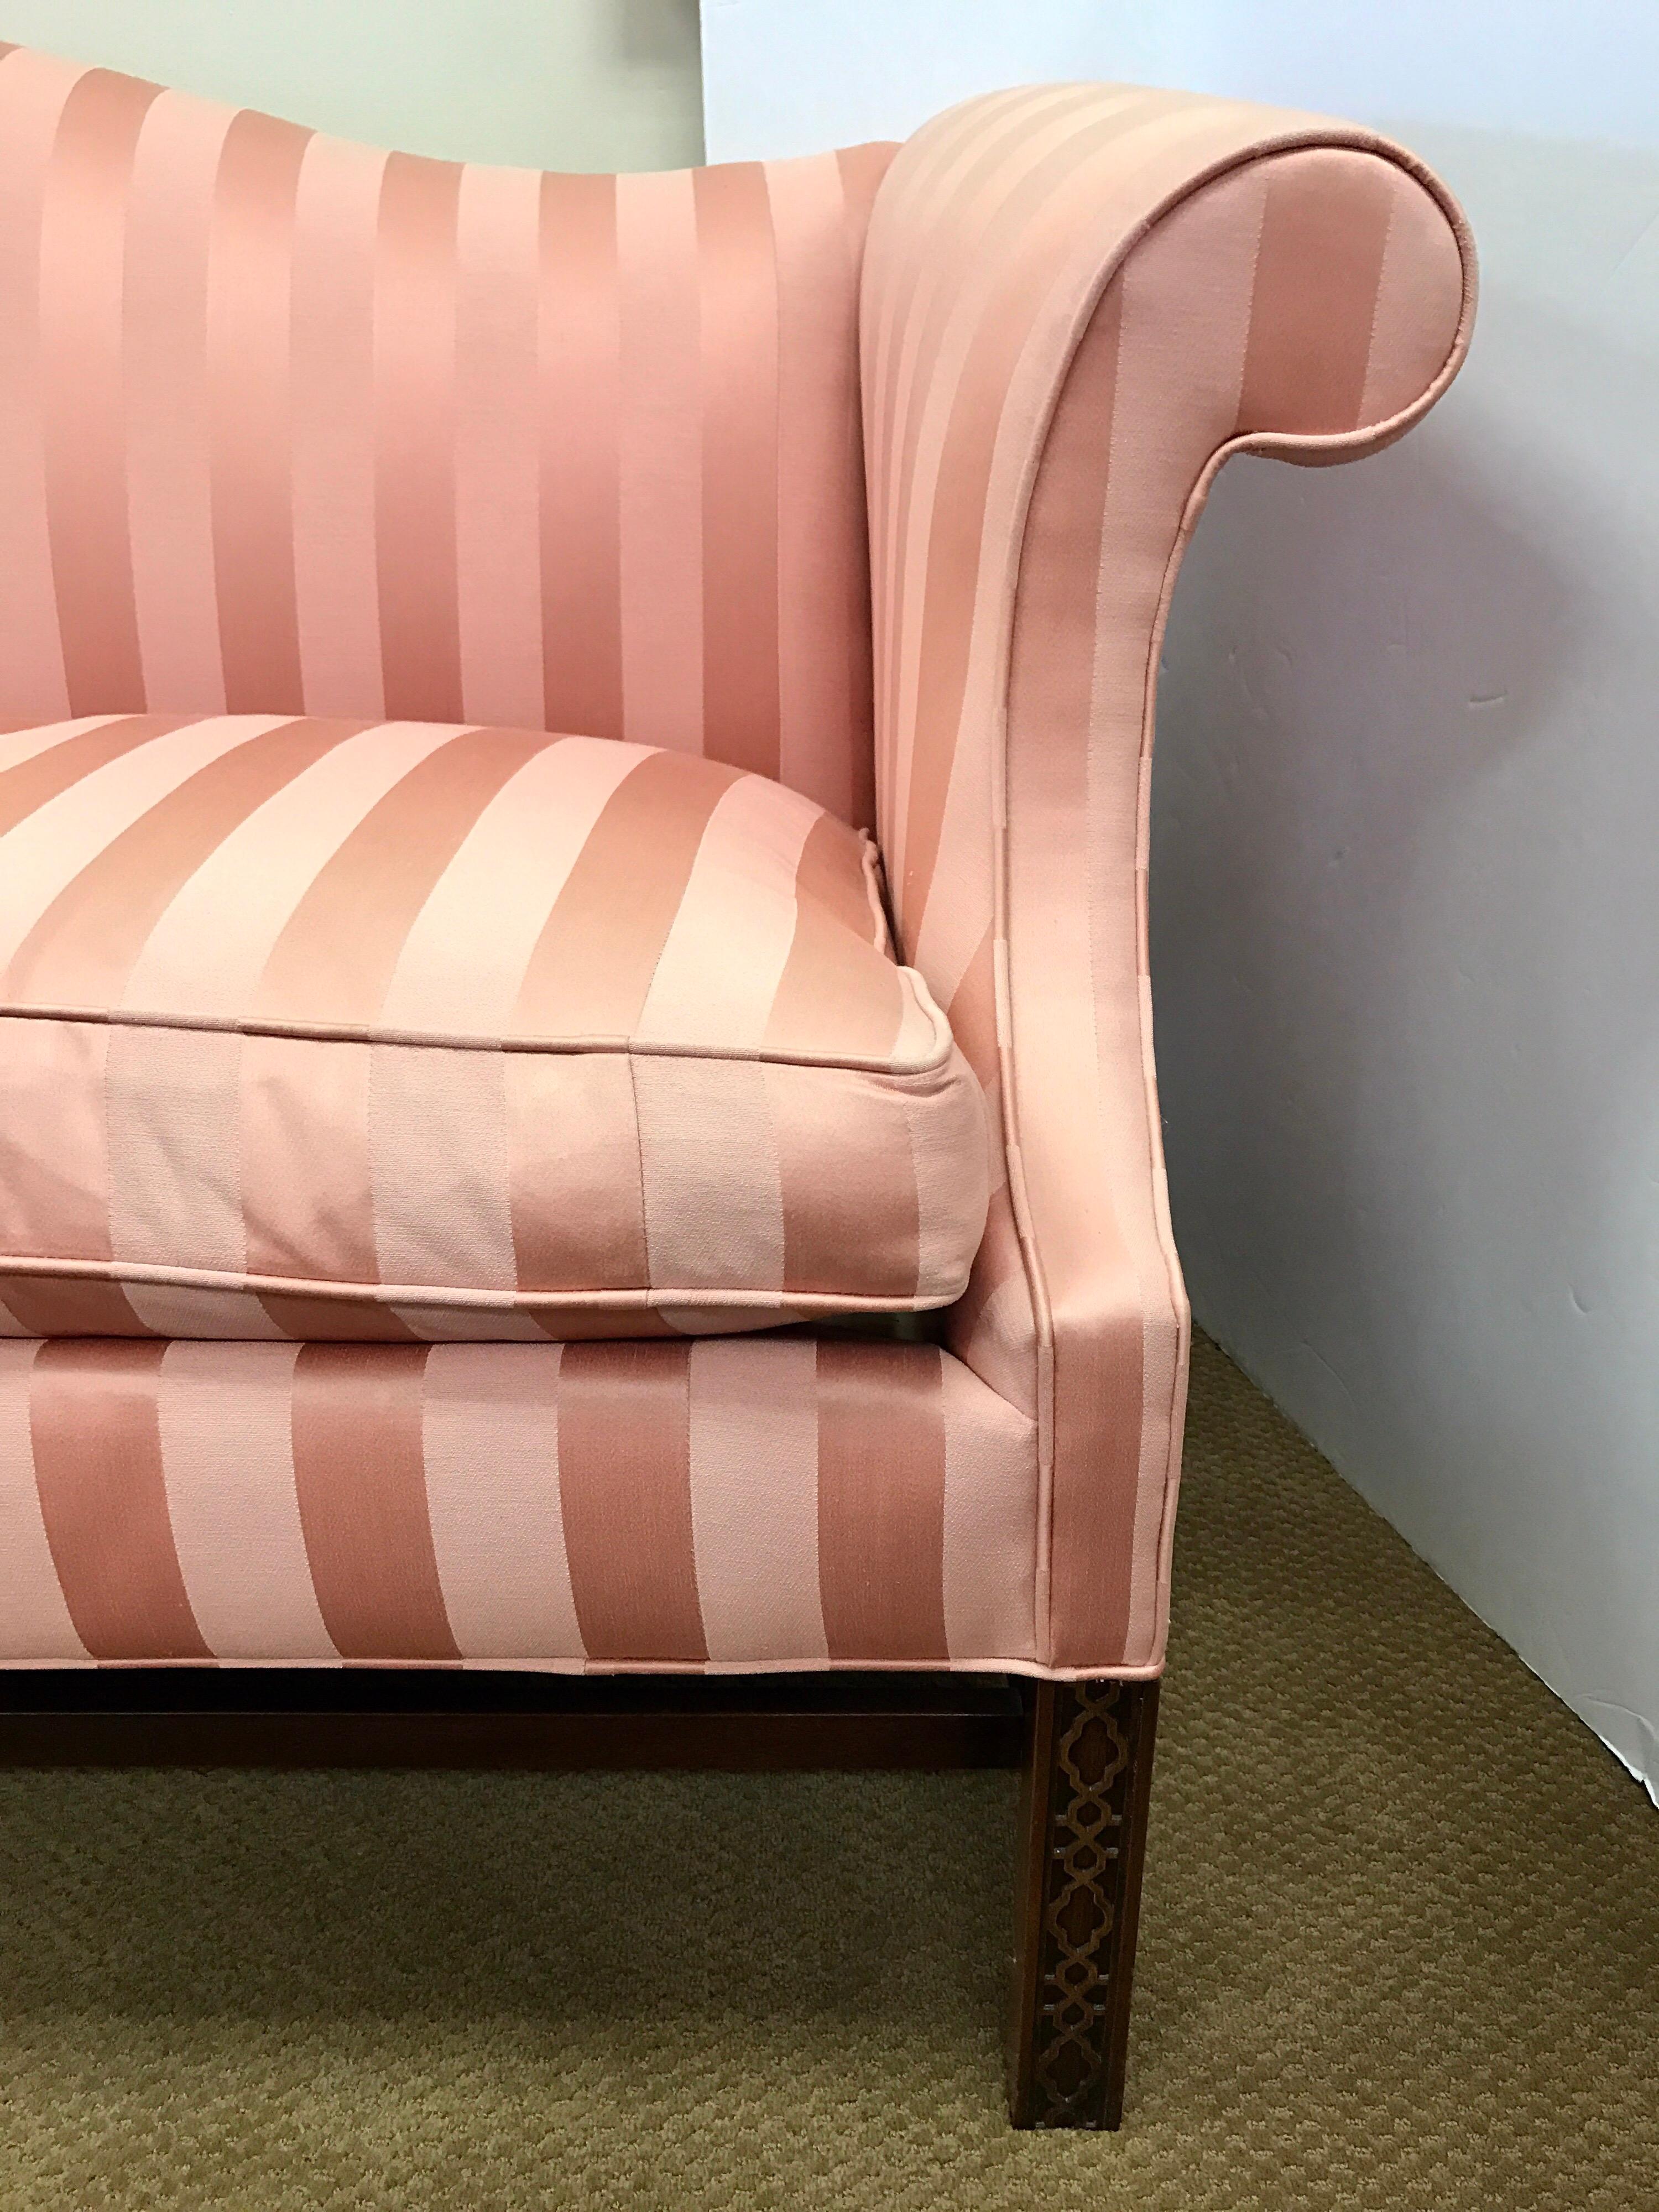 Classic Chippendale style camelback sofa with a mahogany frame with straight legs and stretchers, Chinese carved fretwork on front legs, upholstered in a pretty blush pink striped fabric with down/feather fill seat cushion.